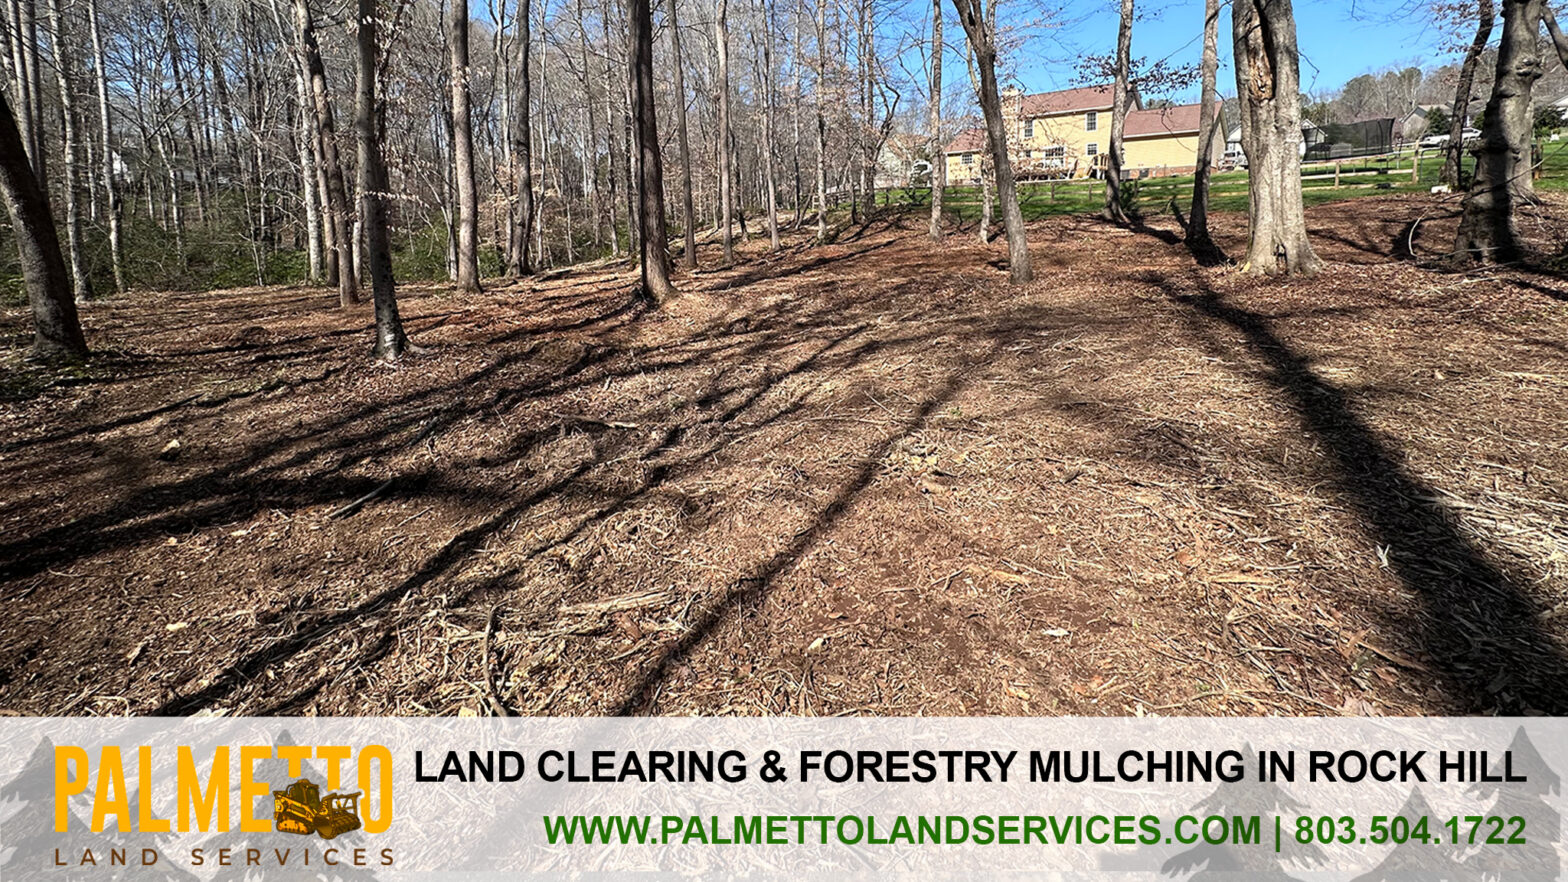 Land Clearing & Forestry Mulching in Rock Hill